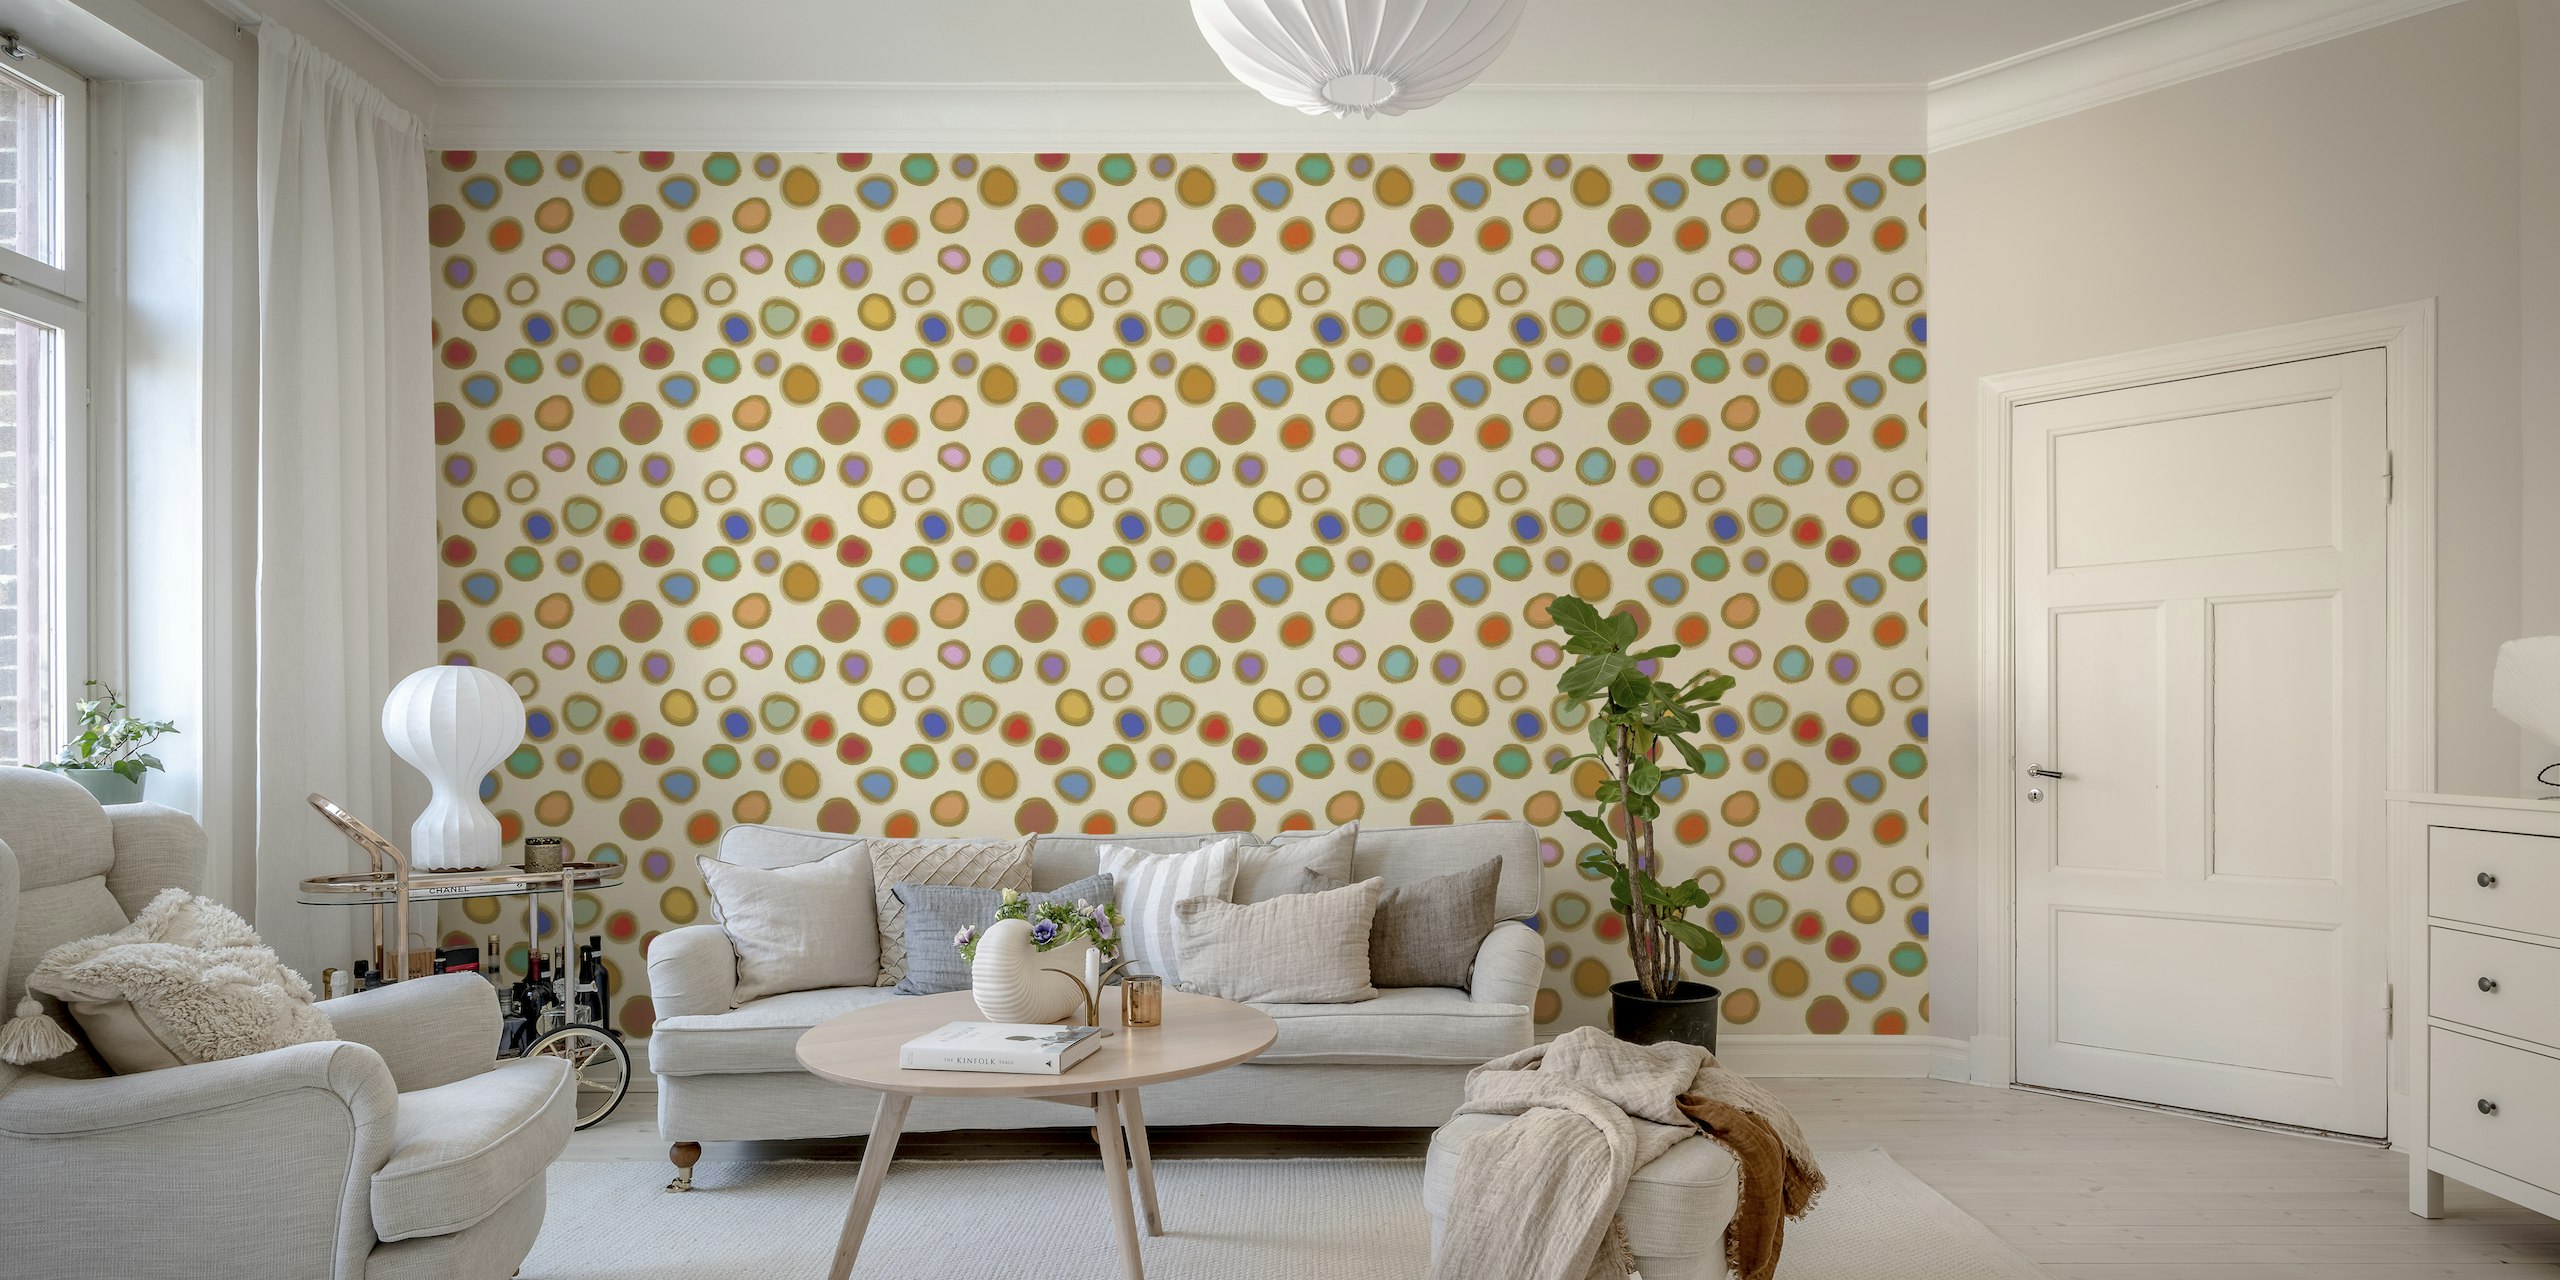 Painted Dots with Gold Outline on Cream Pattern papel pintado